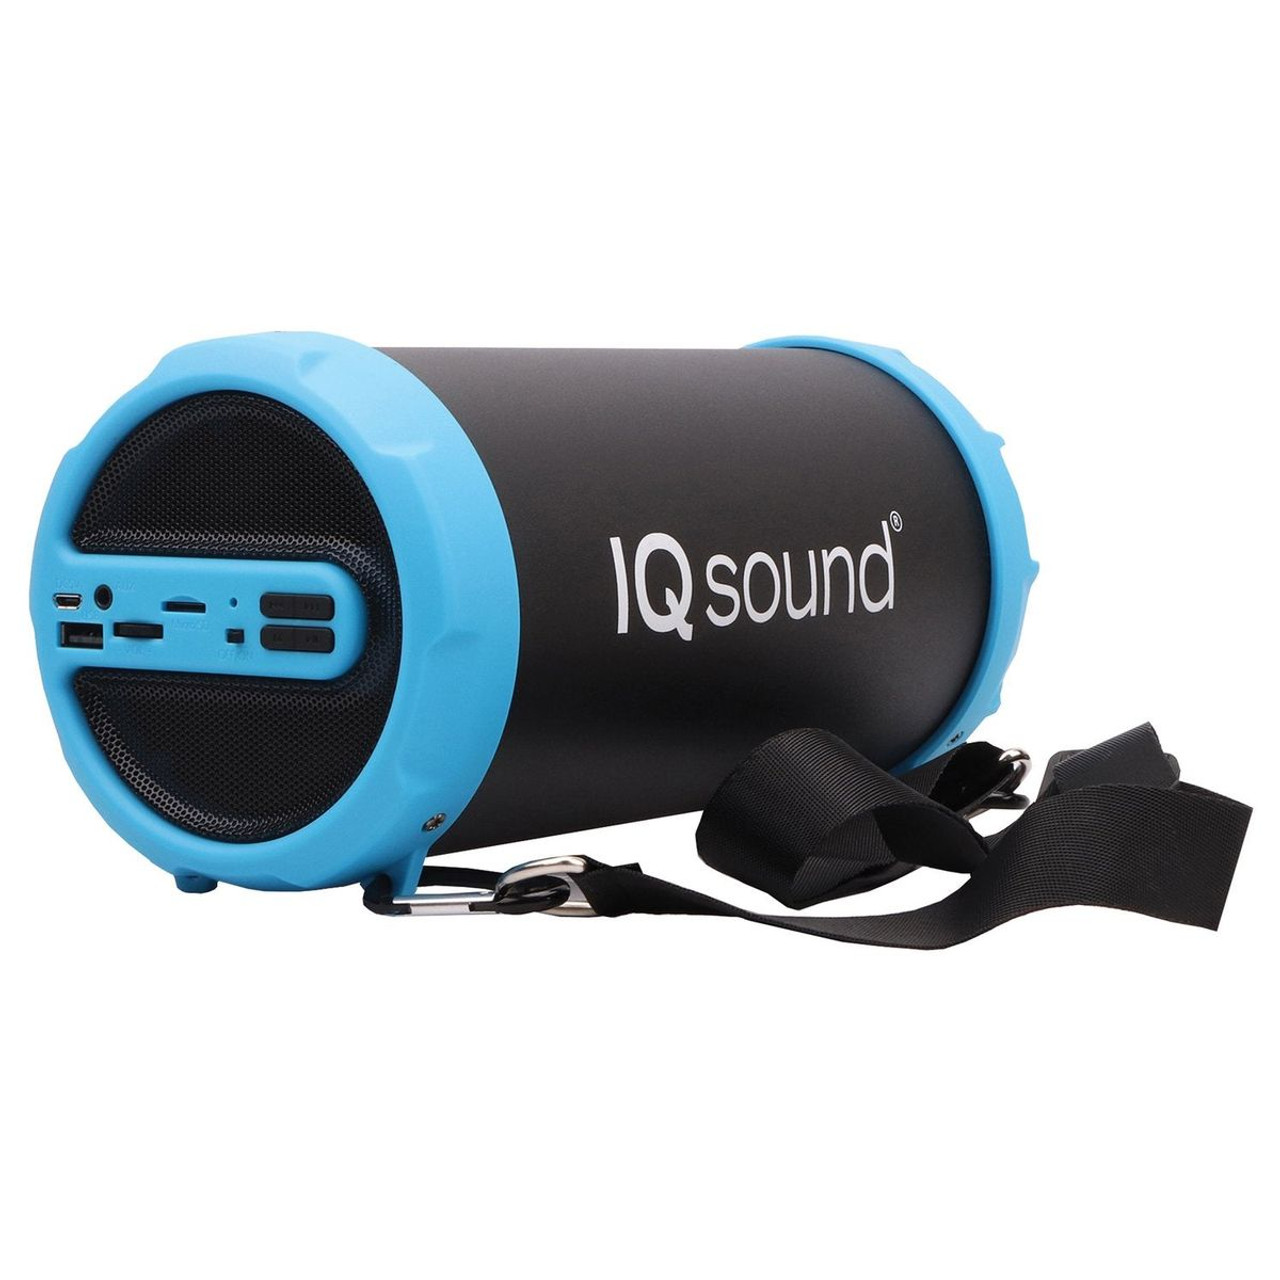 Supersonic Portable Bluetooth Speaker with 10m Range product image